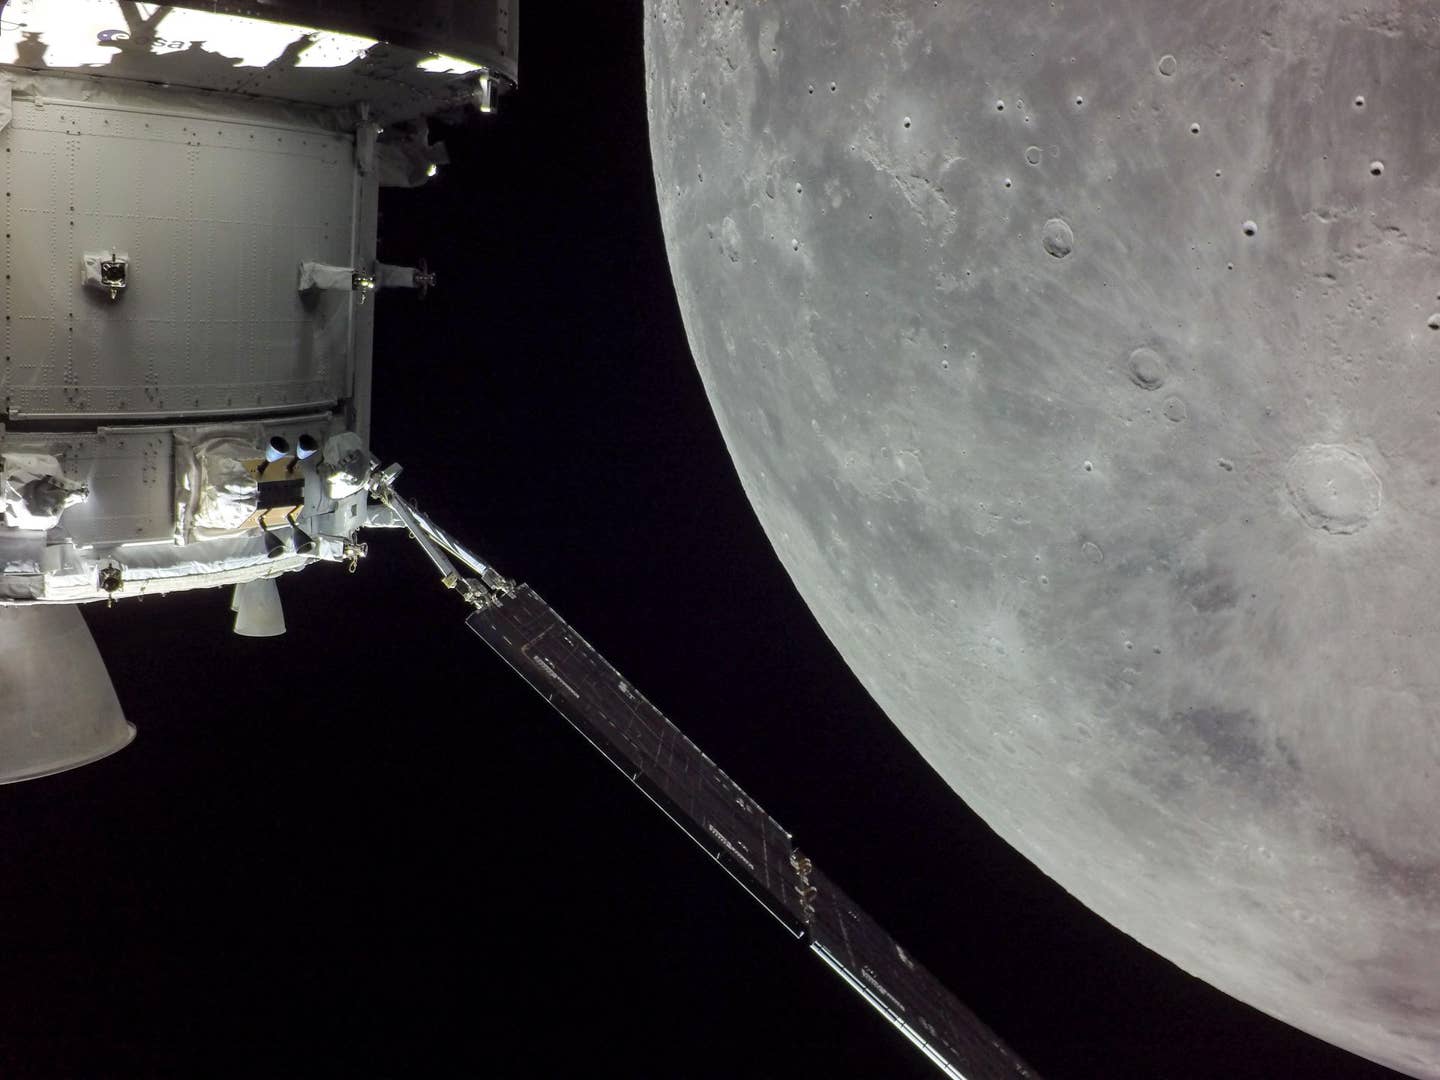 NASA&#8217;s Orion Is Taking These Amazing Photos During Its Mission to the Moon